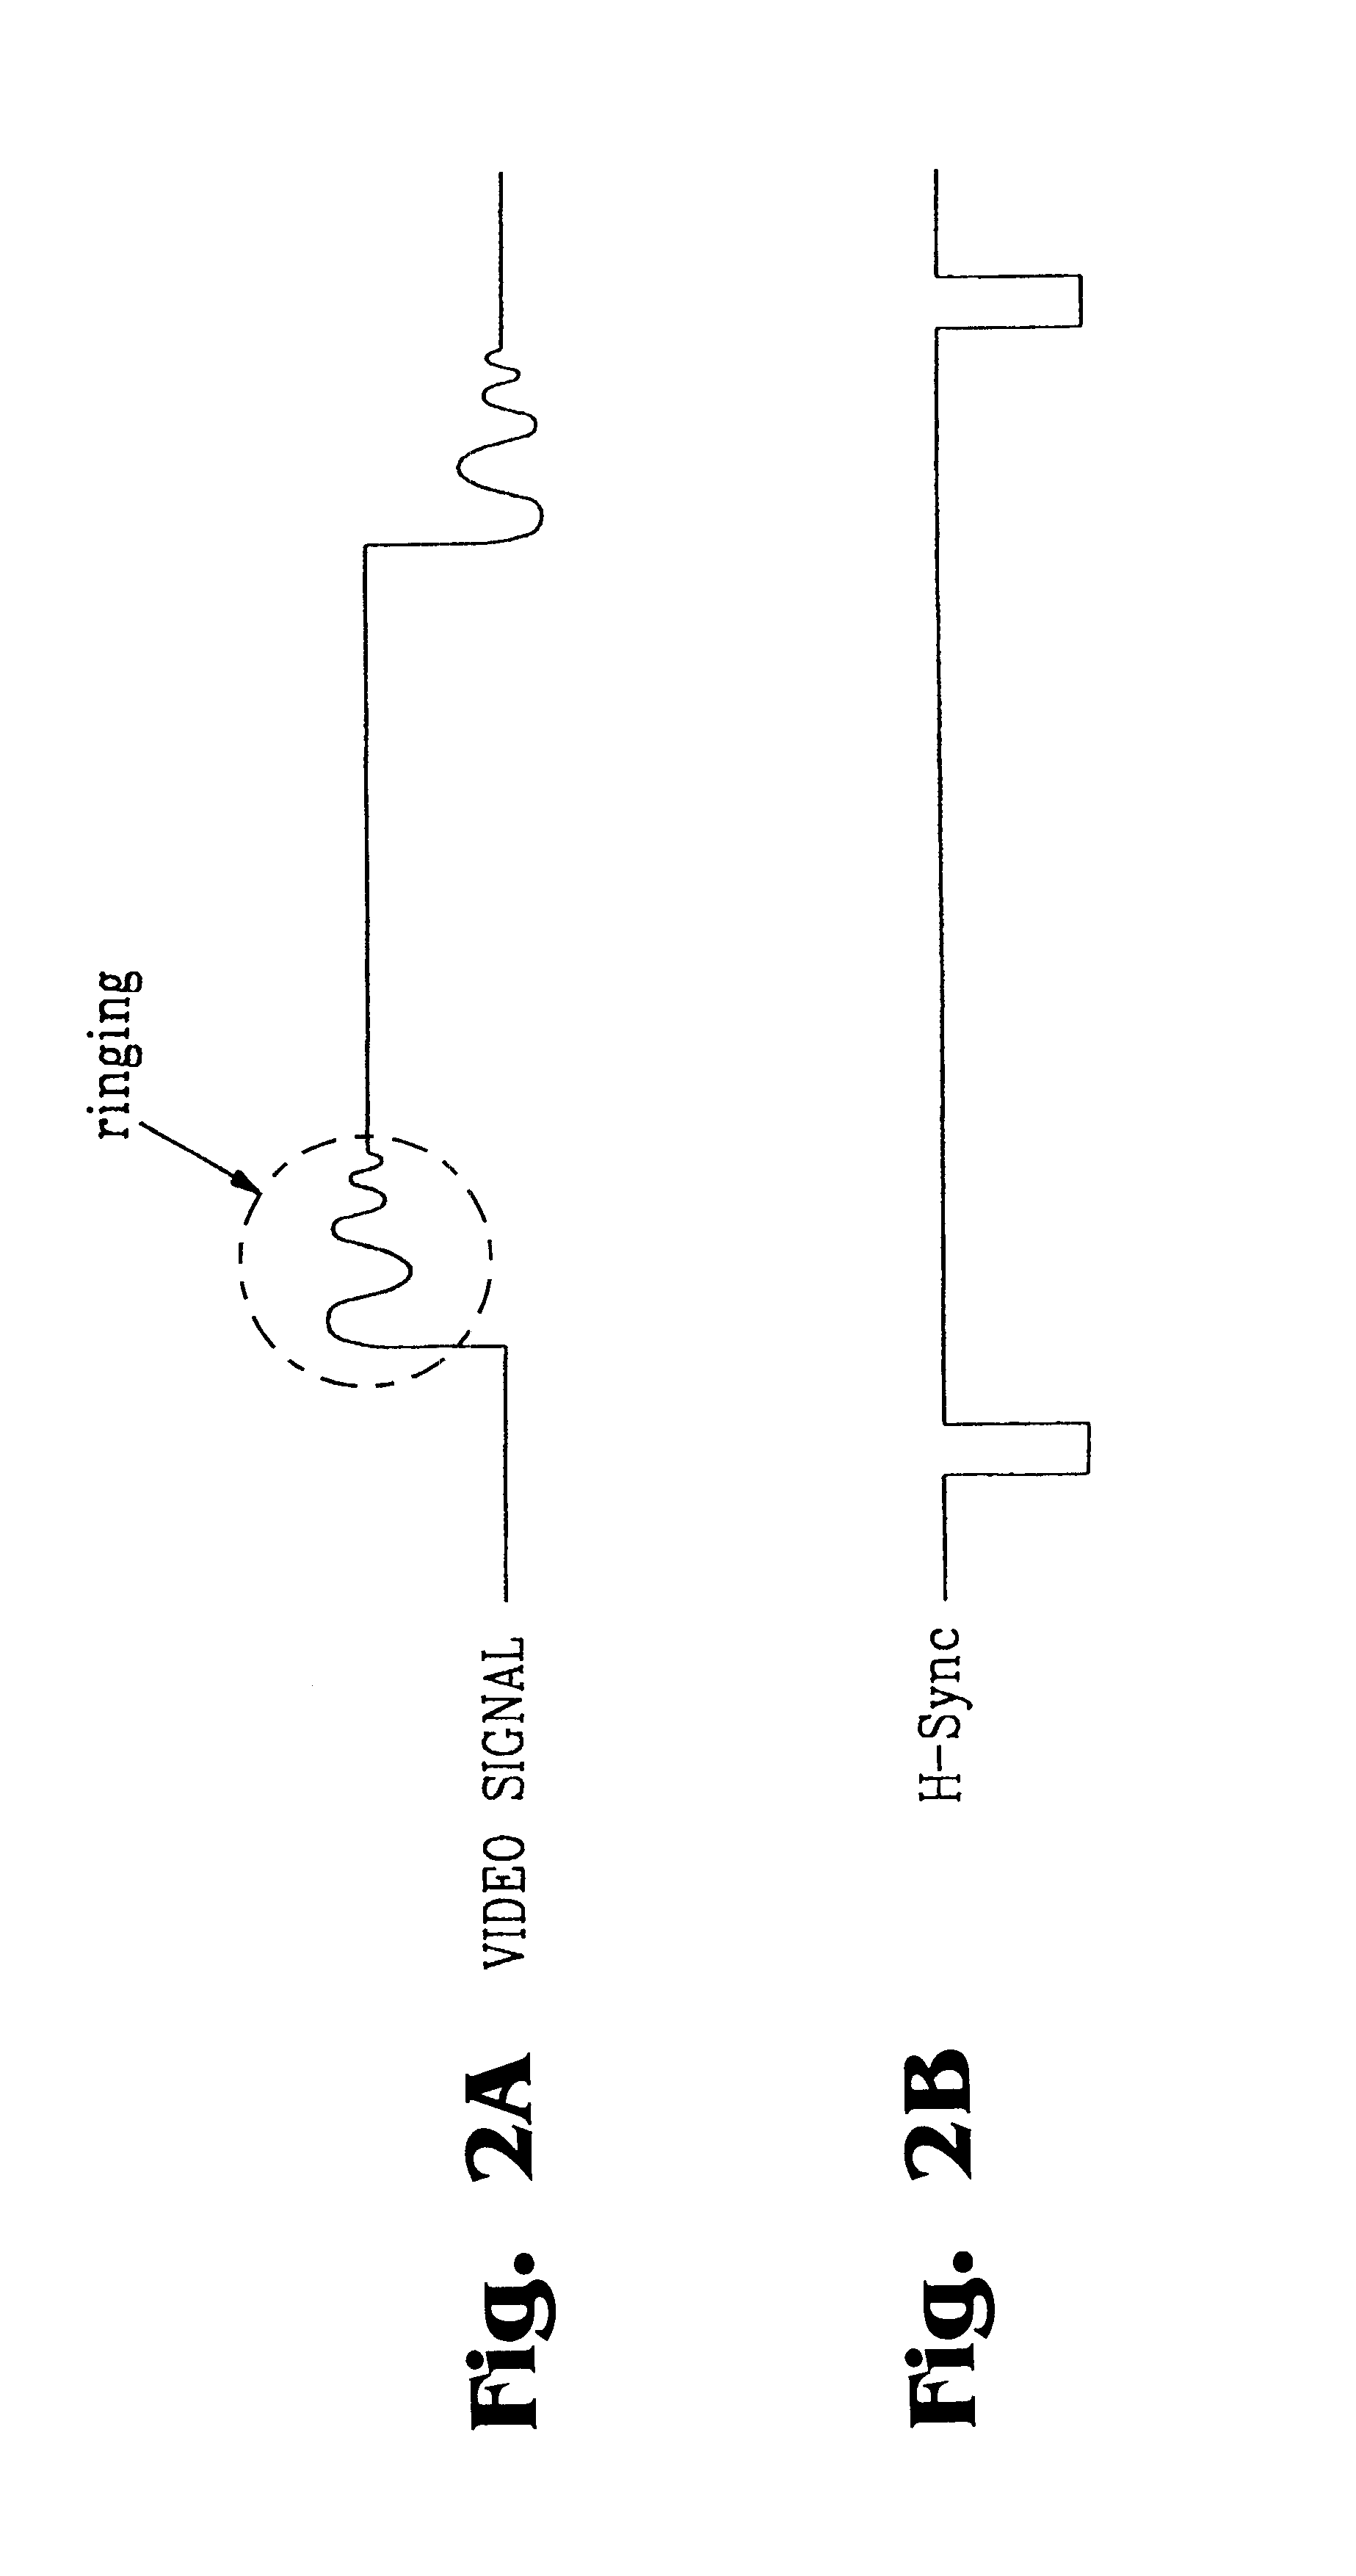 LCD gain and offset value adjustment system and method